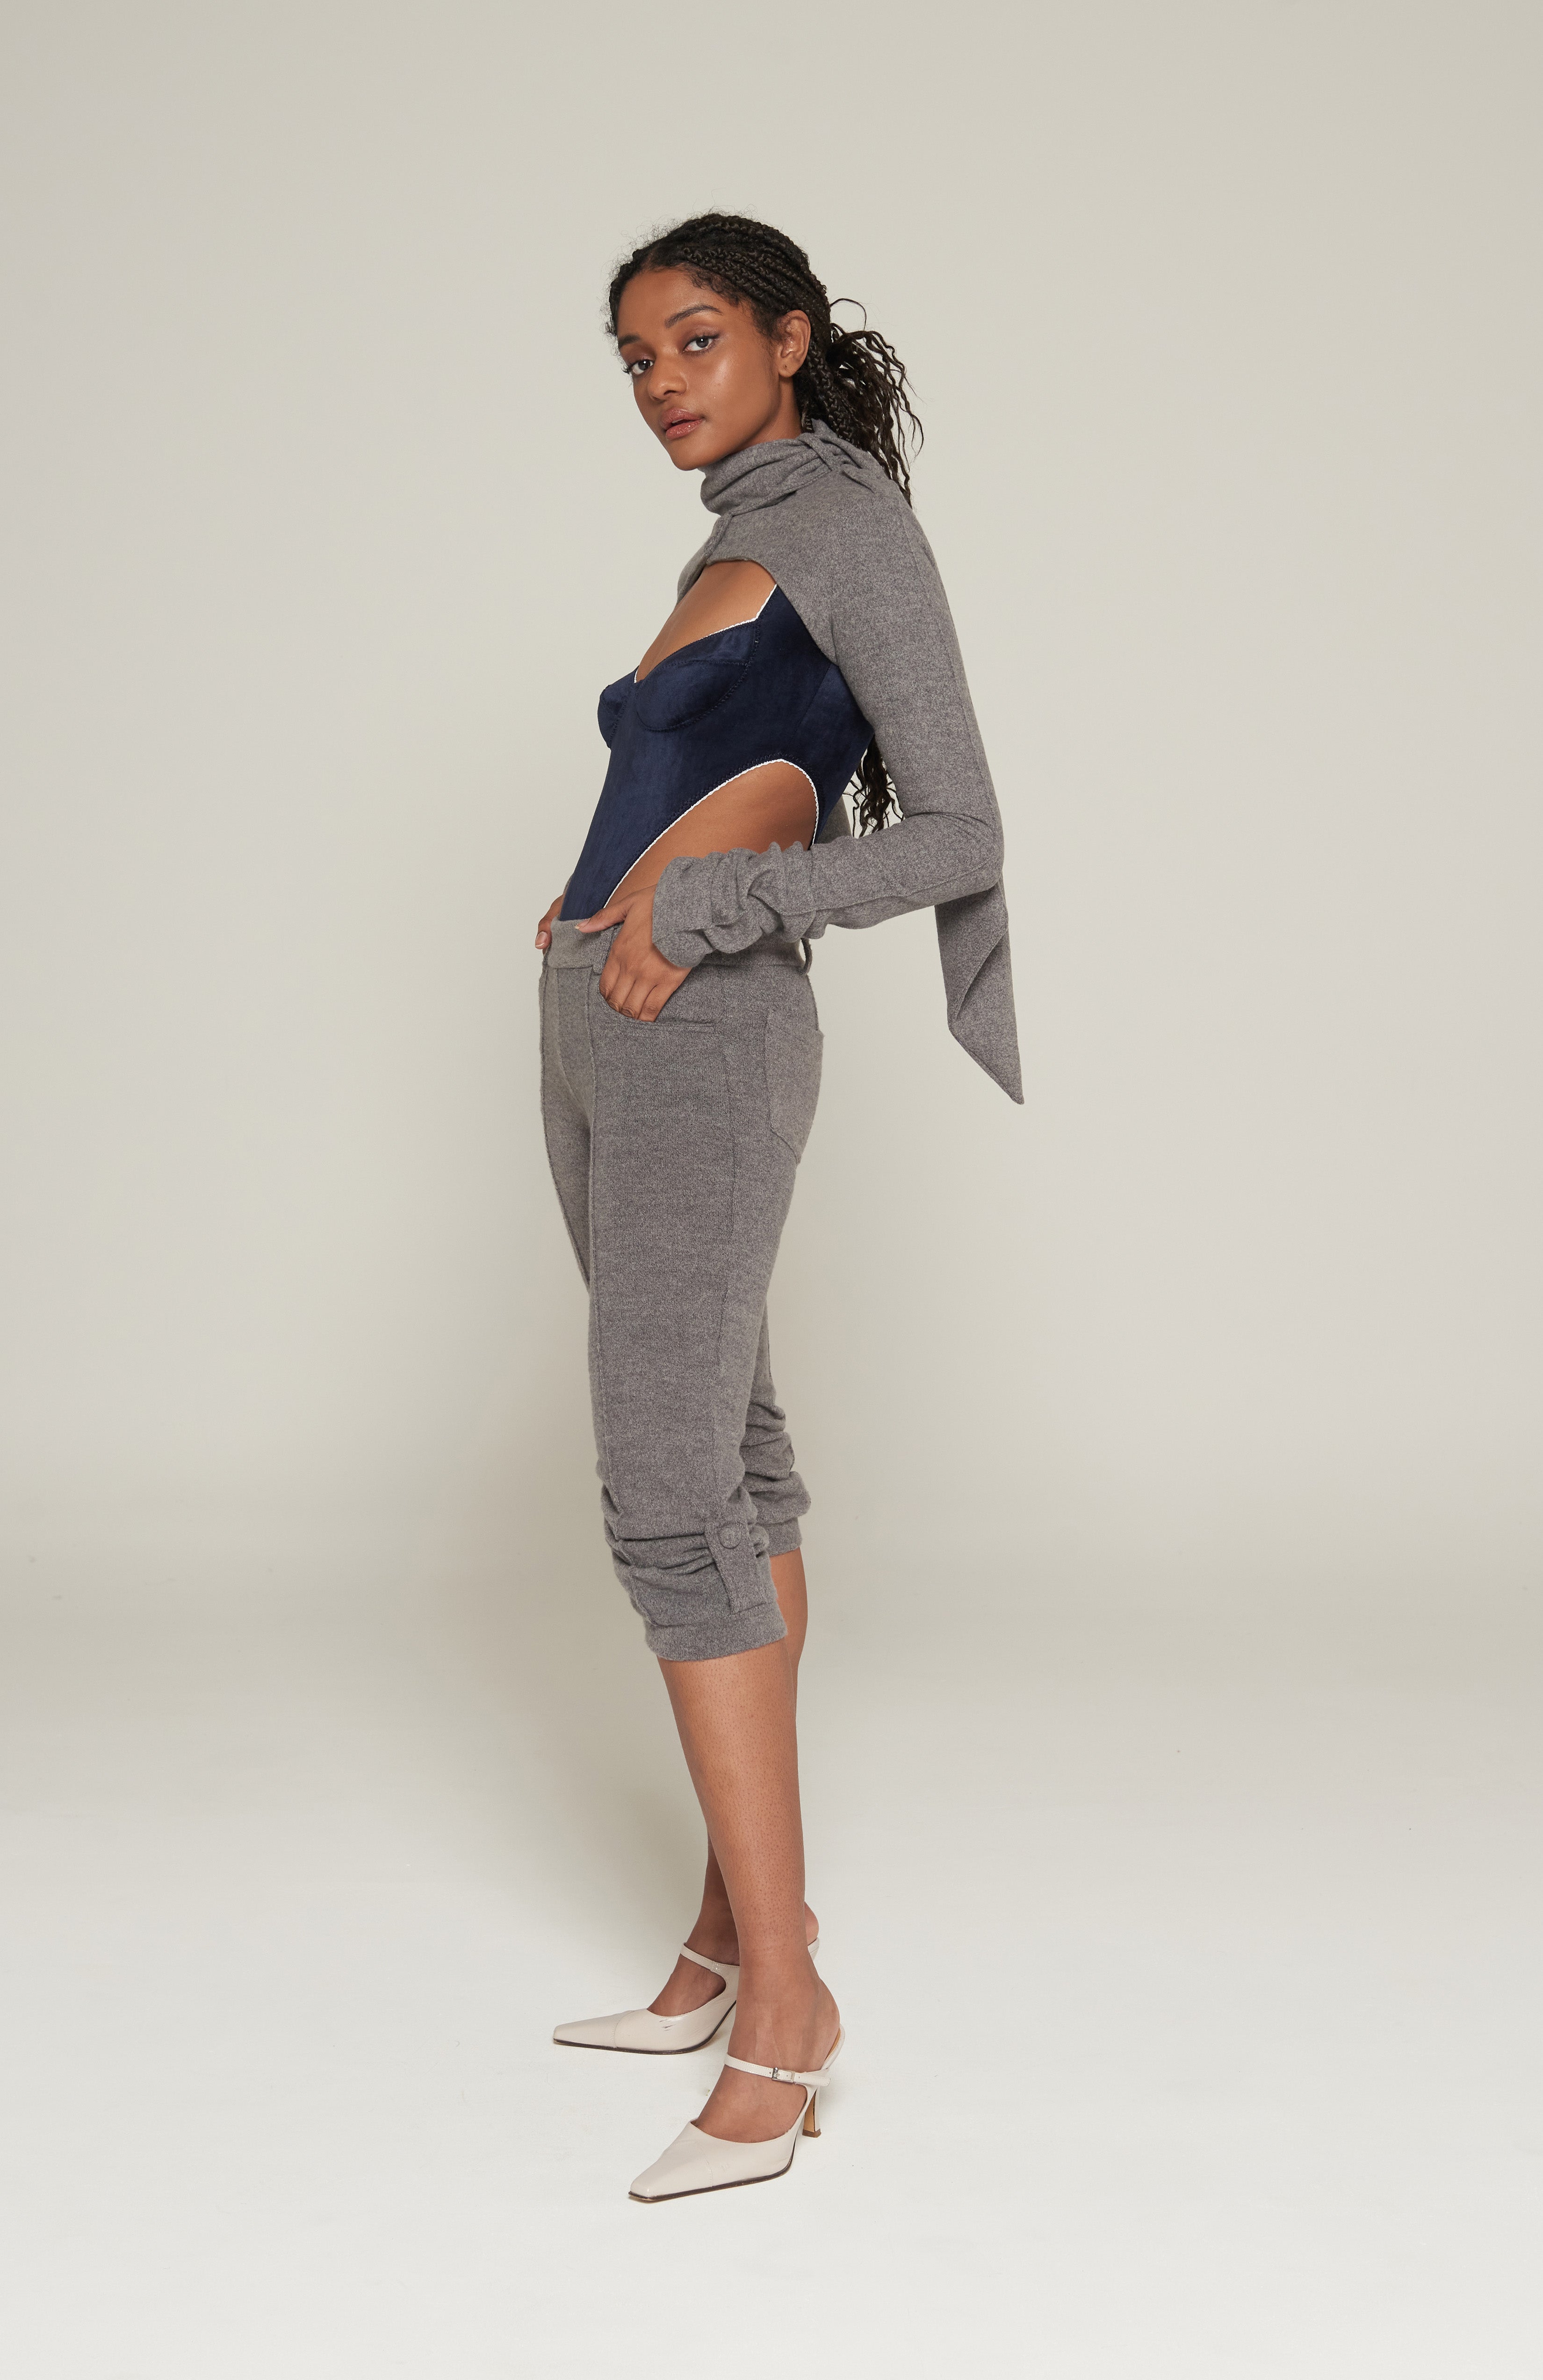 Mid waisted 3/4 capri pant in brushed grey marl. Jean style front pockets with back patch pockets. Features front and back pintucks with gathers at the calf. Aviator epaulette tabs at leg cuffs secured with self covered mushroom buttons. Tidy centre back zip closure and belt loops.